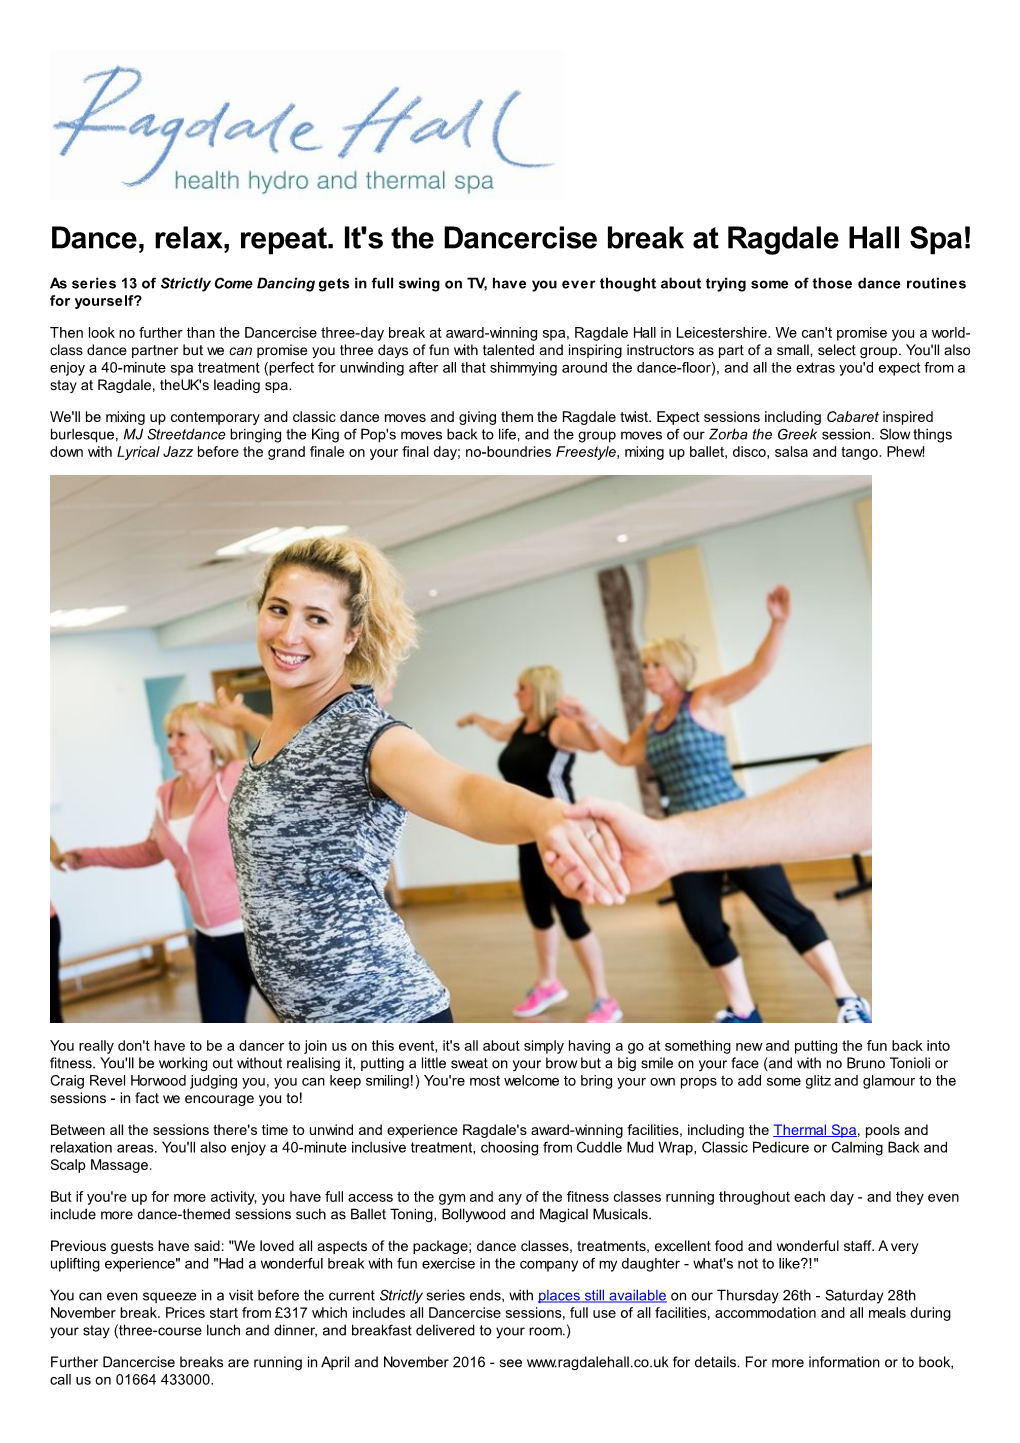 Dance, Relax, Repeat. It's the Dancercise Break at Ragdale Hall Spa!